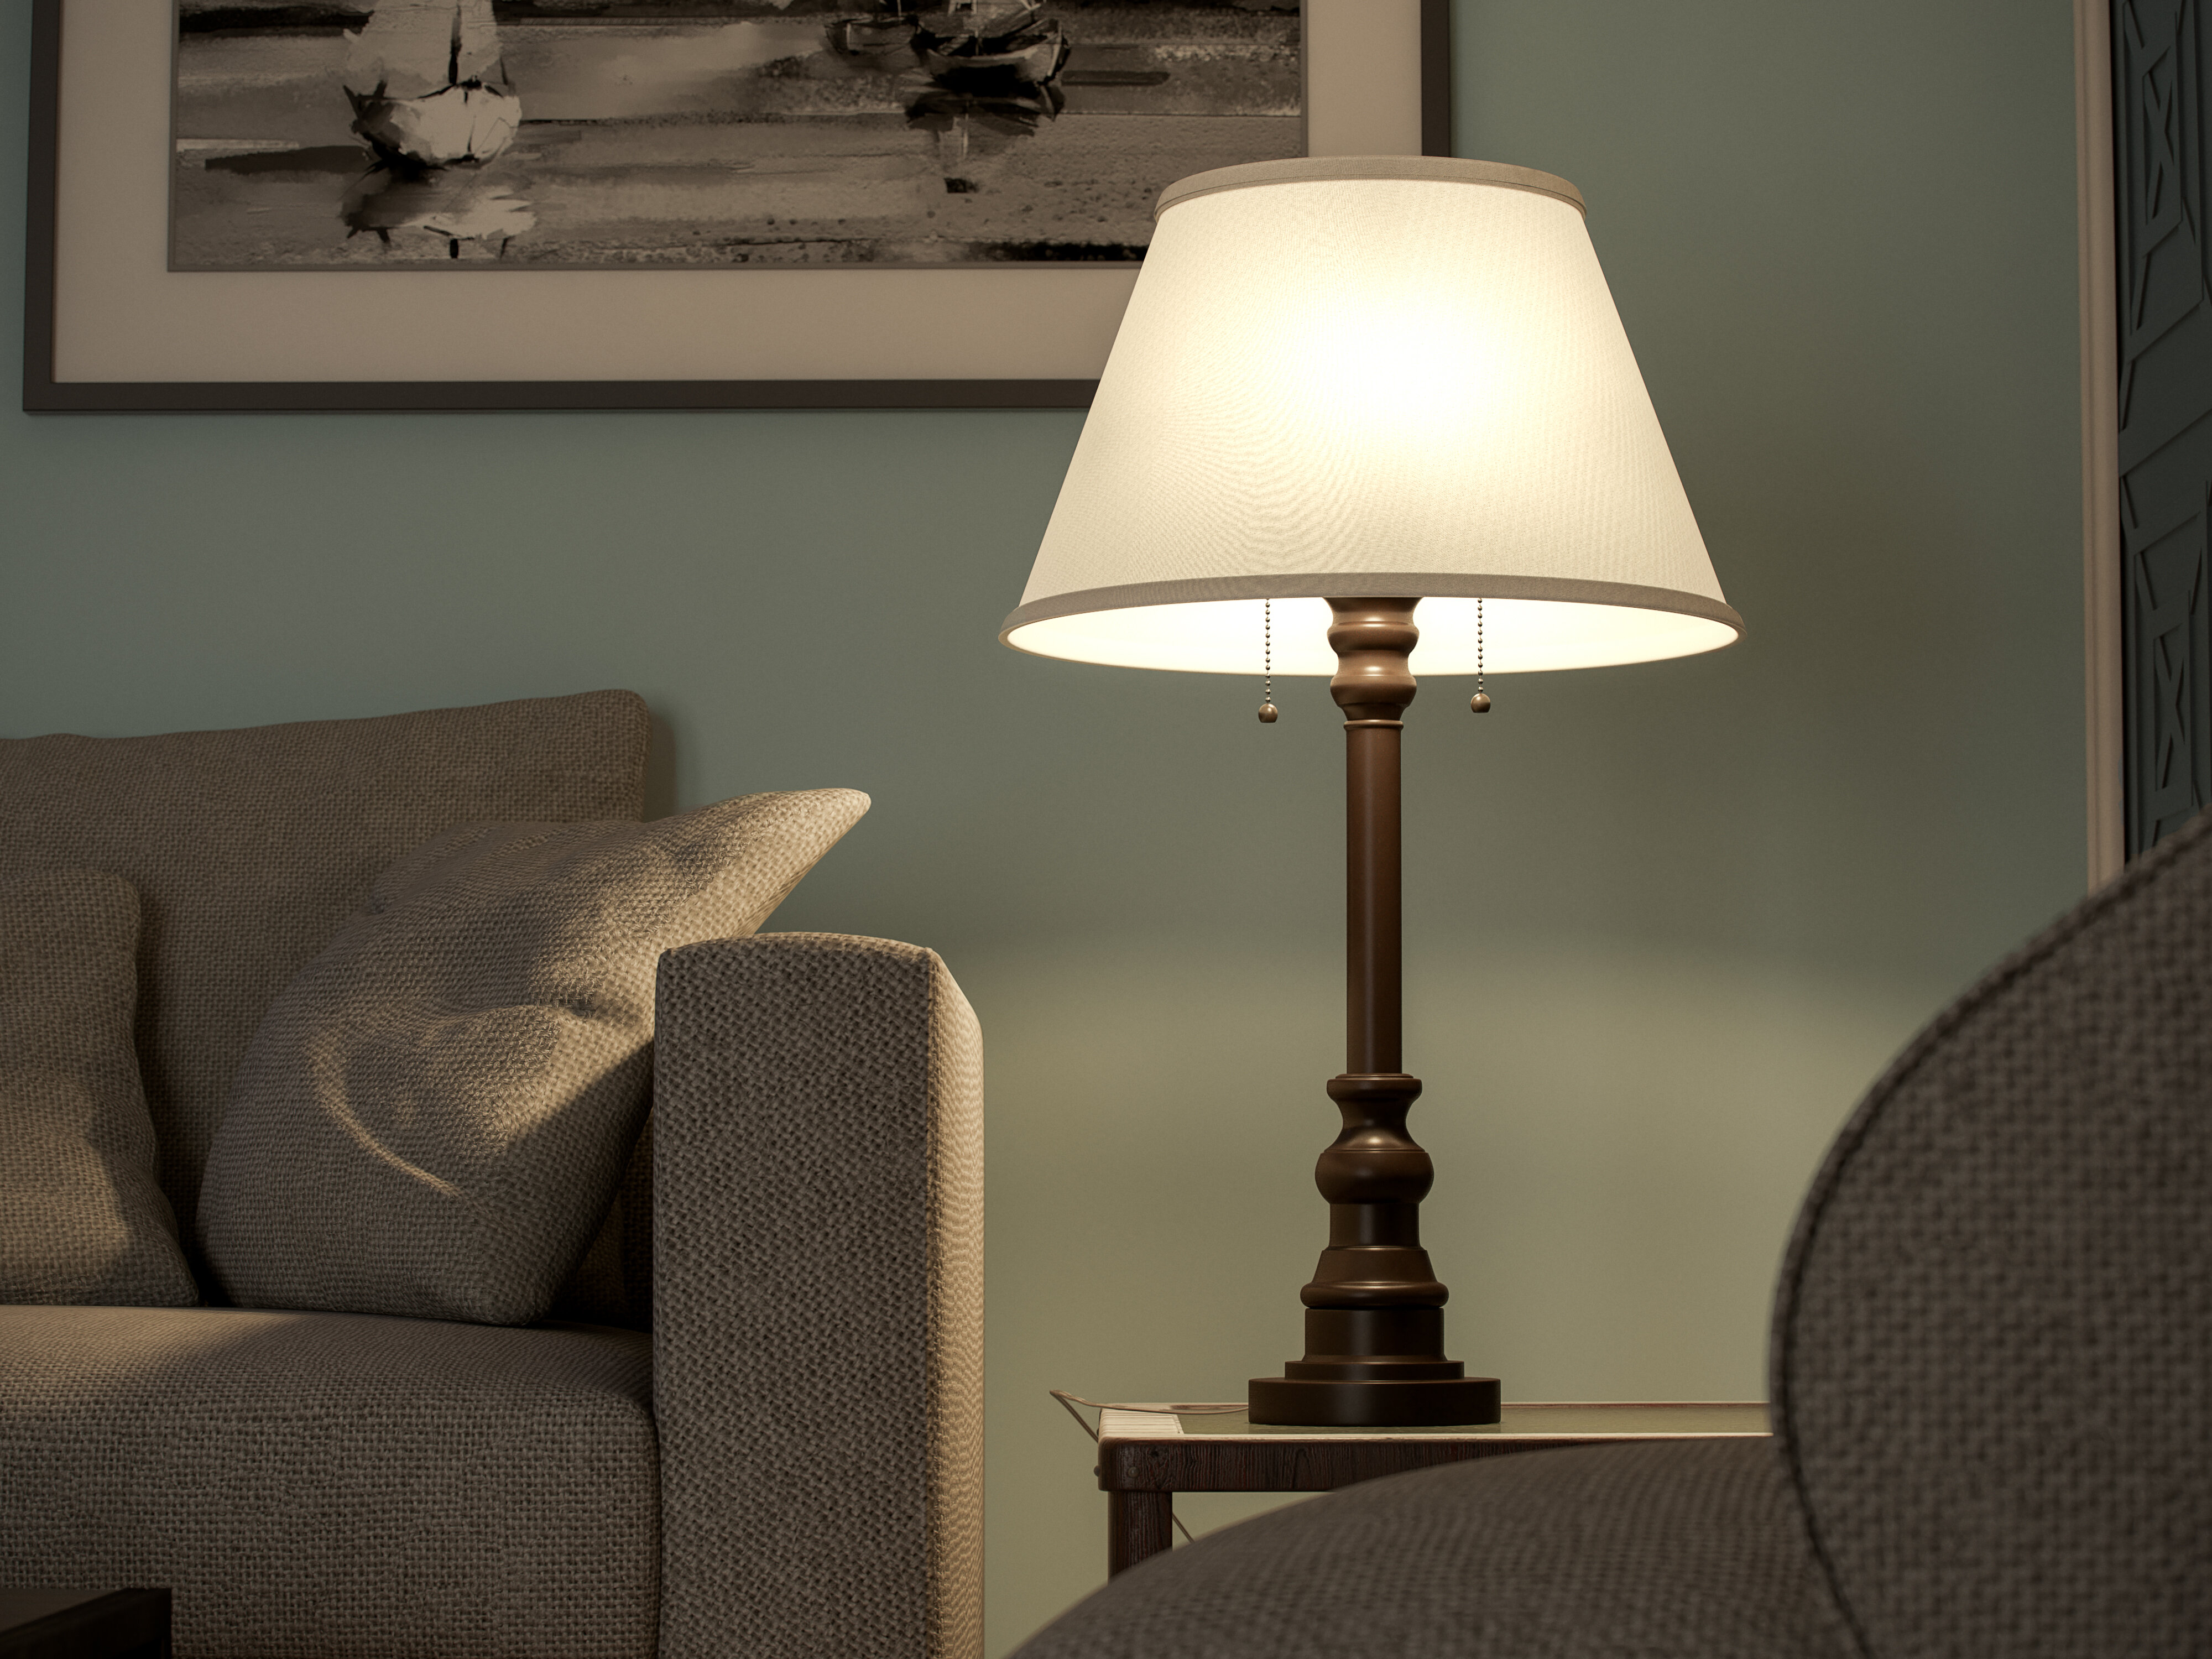 Bedside Lamp With Pull Chain / Oxyura Itl440b22bk 2 Lt Table Lamp Pull